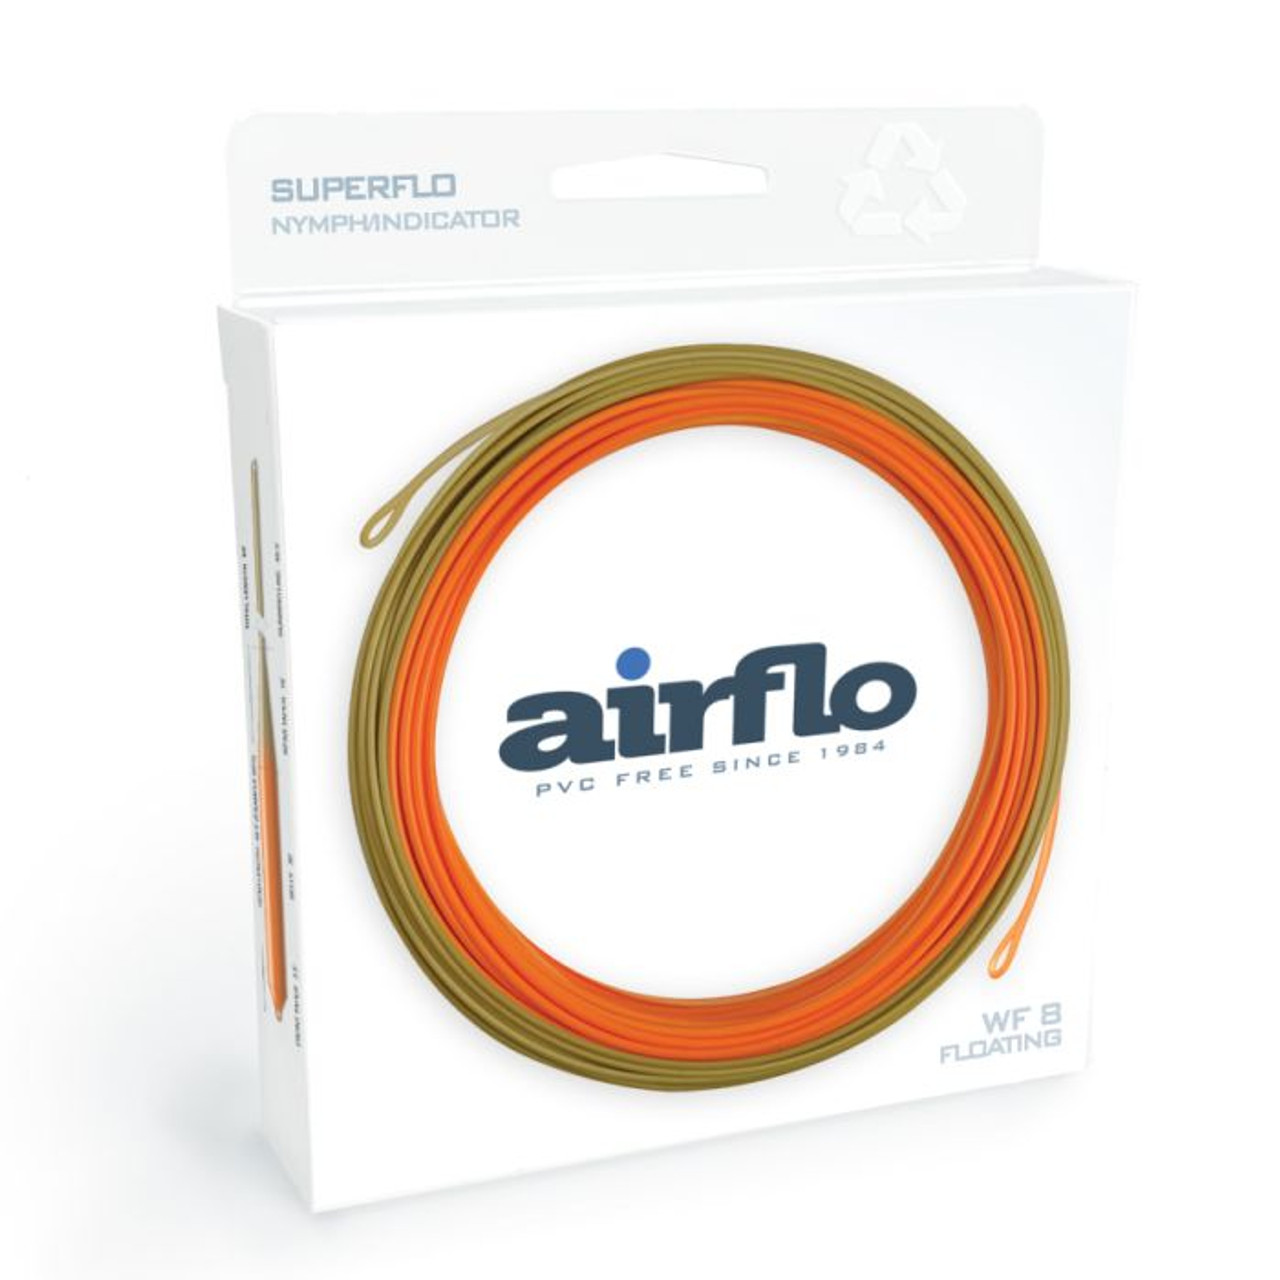 Airflo Nymph/Indicator Fly Line WF5F